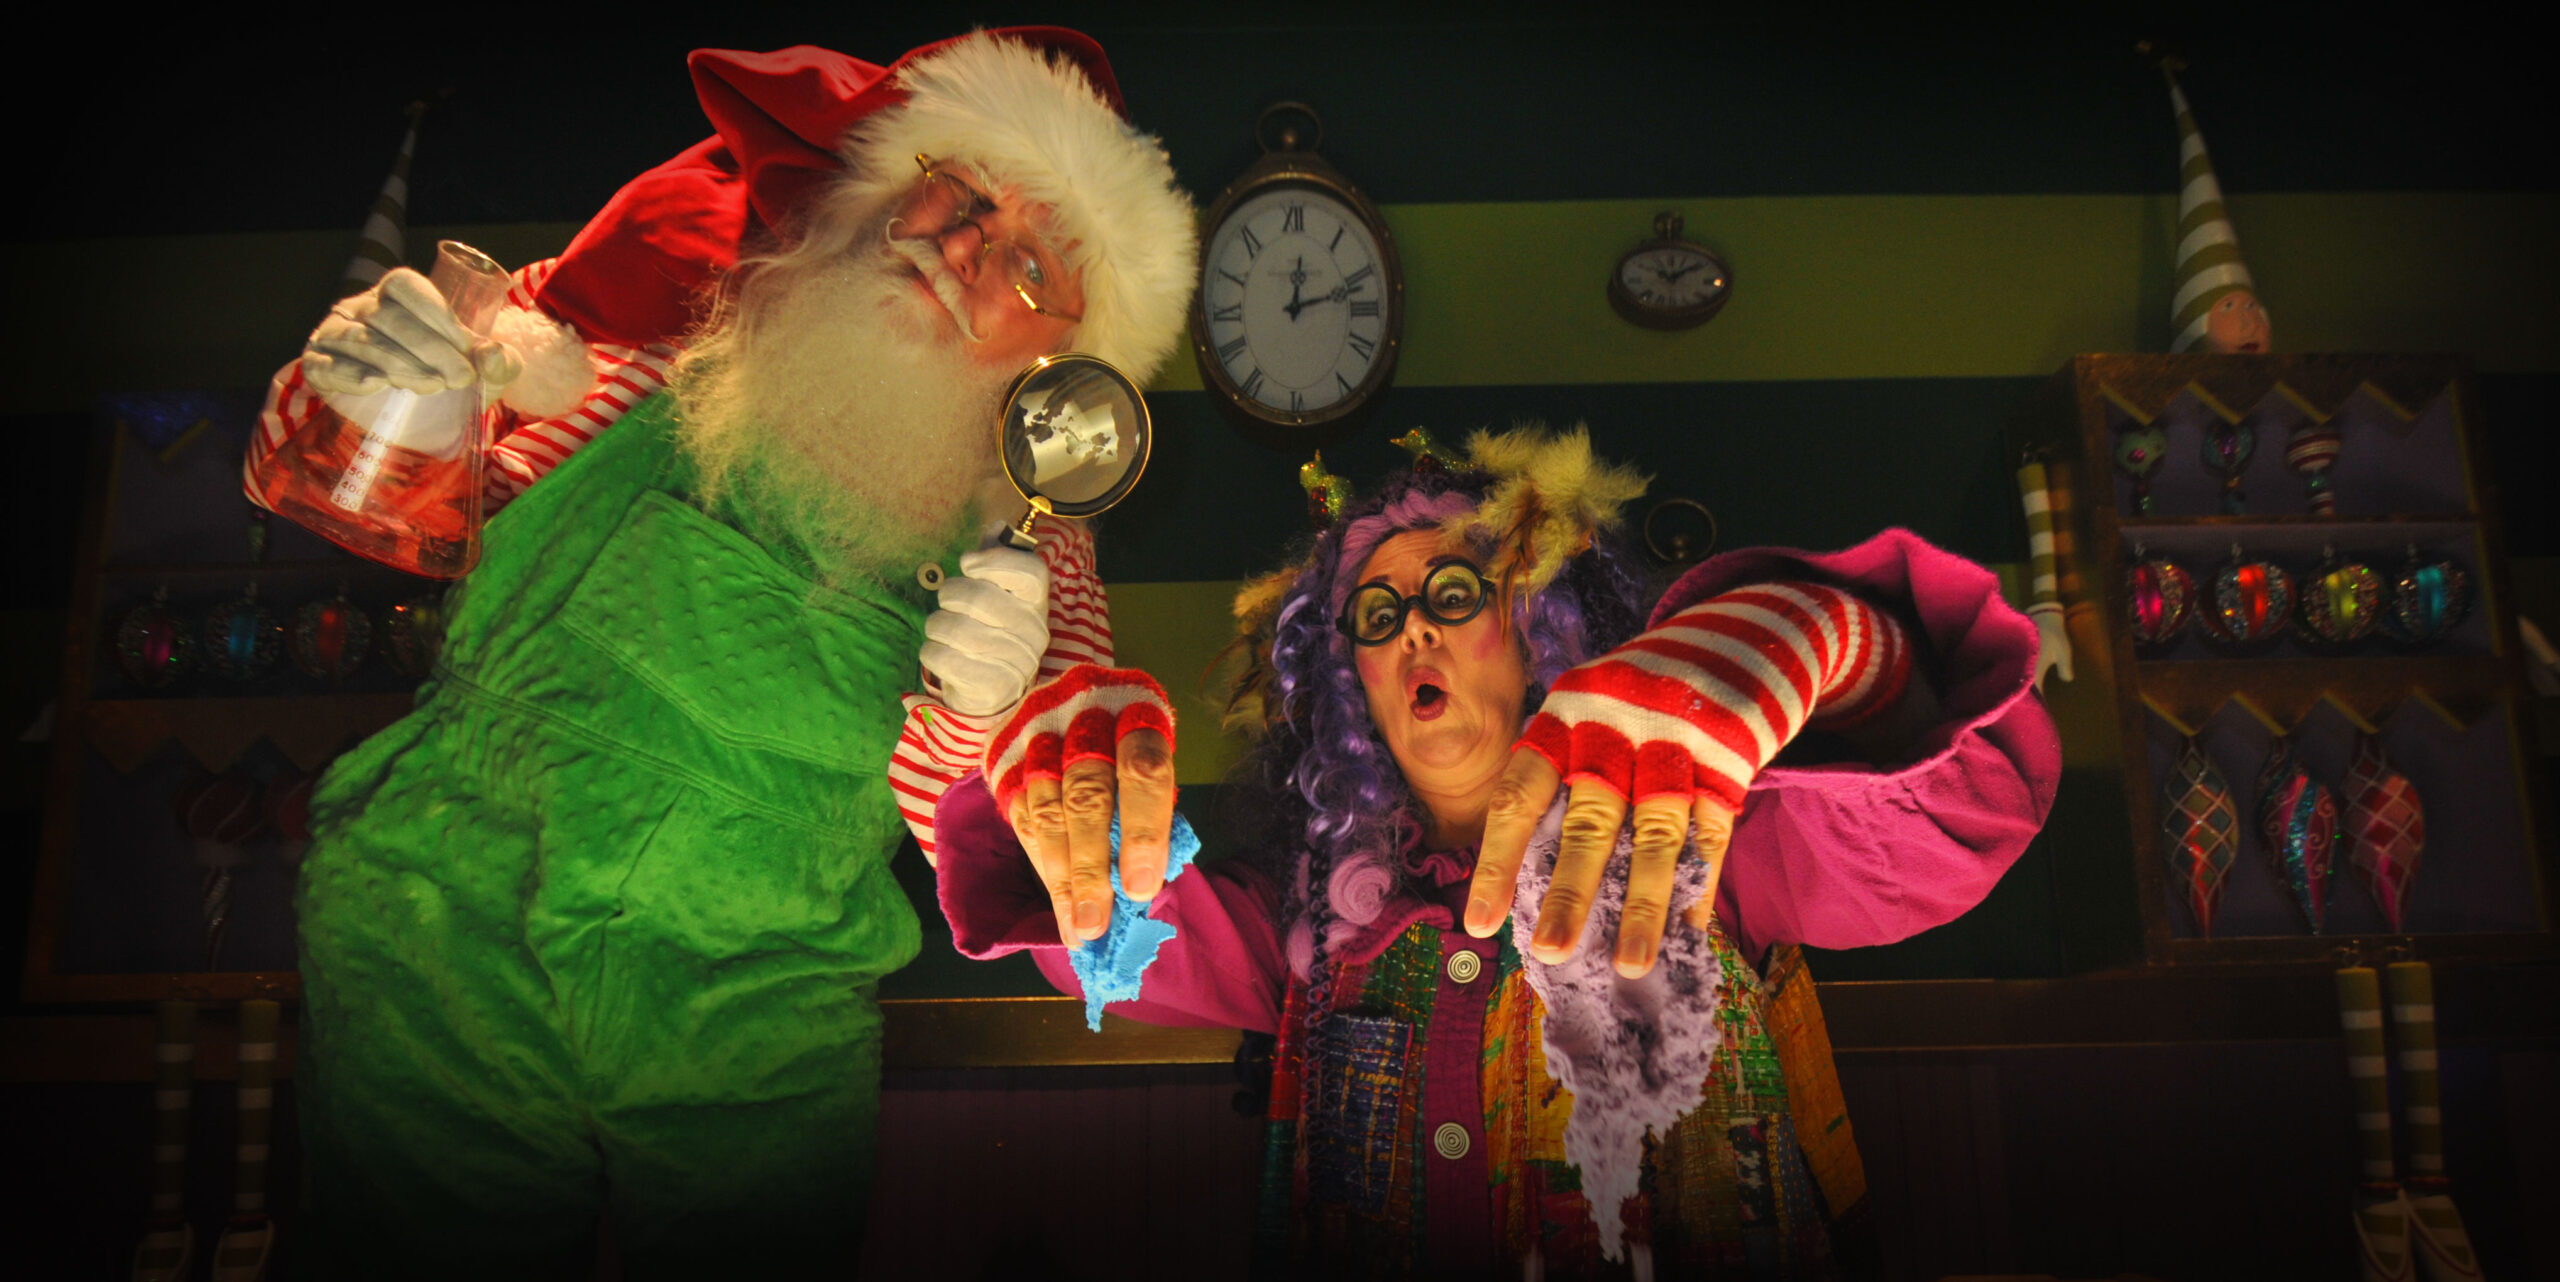 Experience An Unforgettable Christmas Adventure With Mr. Kringle & Friends In Cleveland, Ohio!